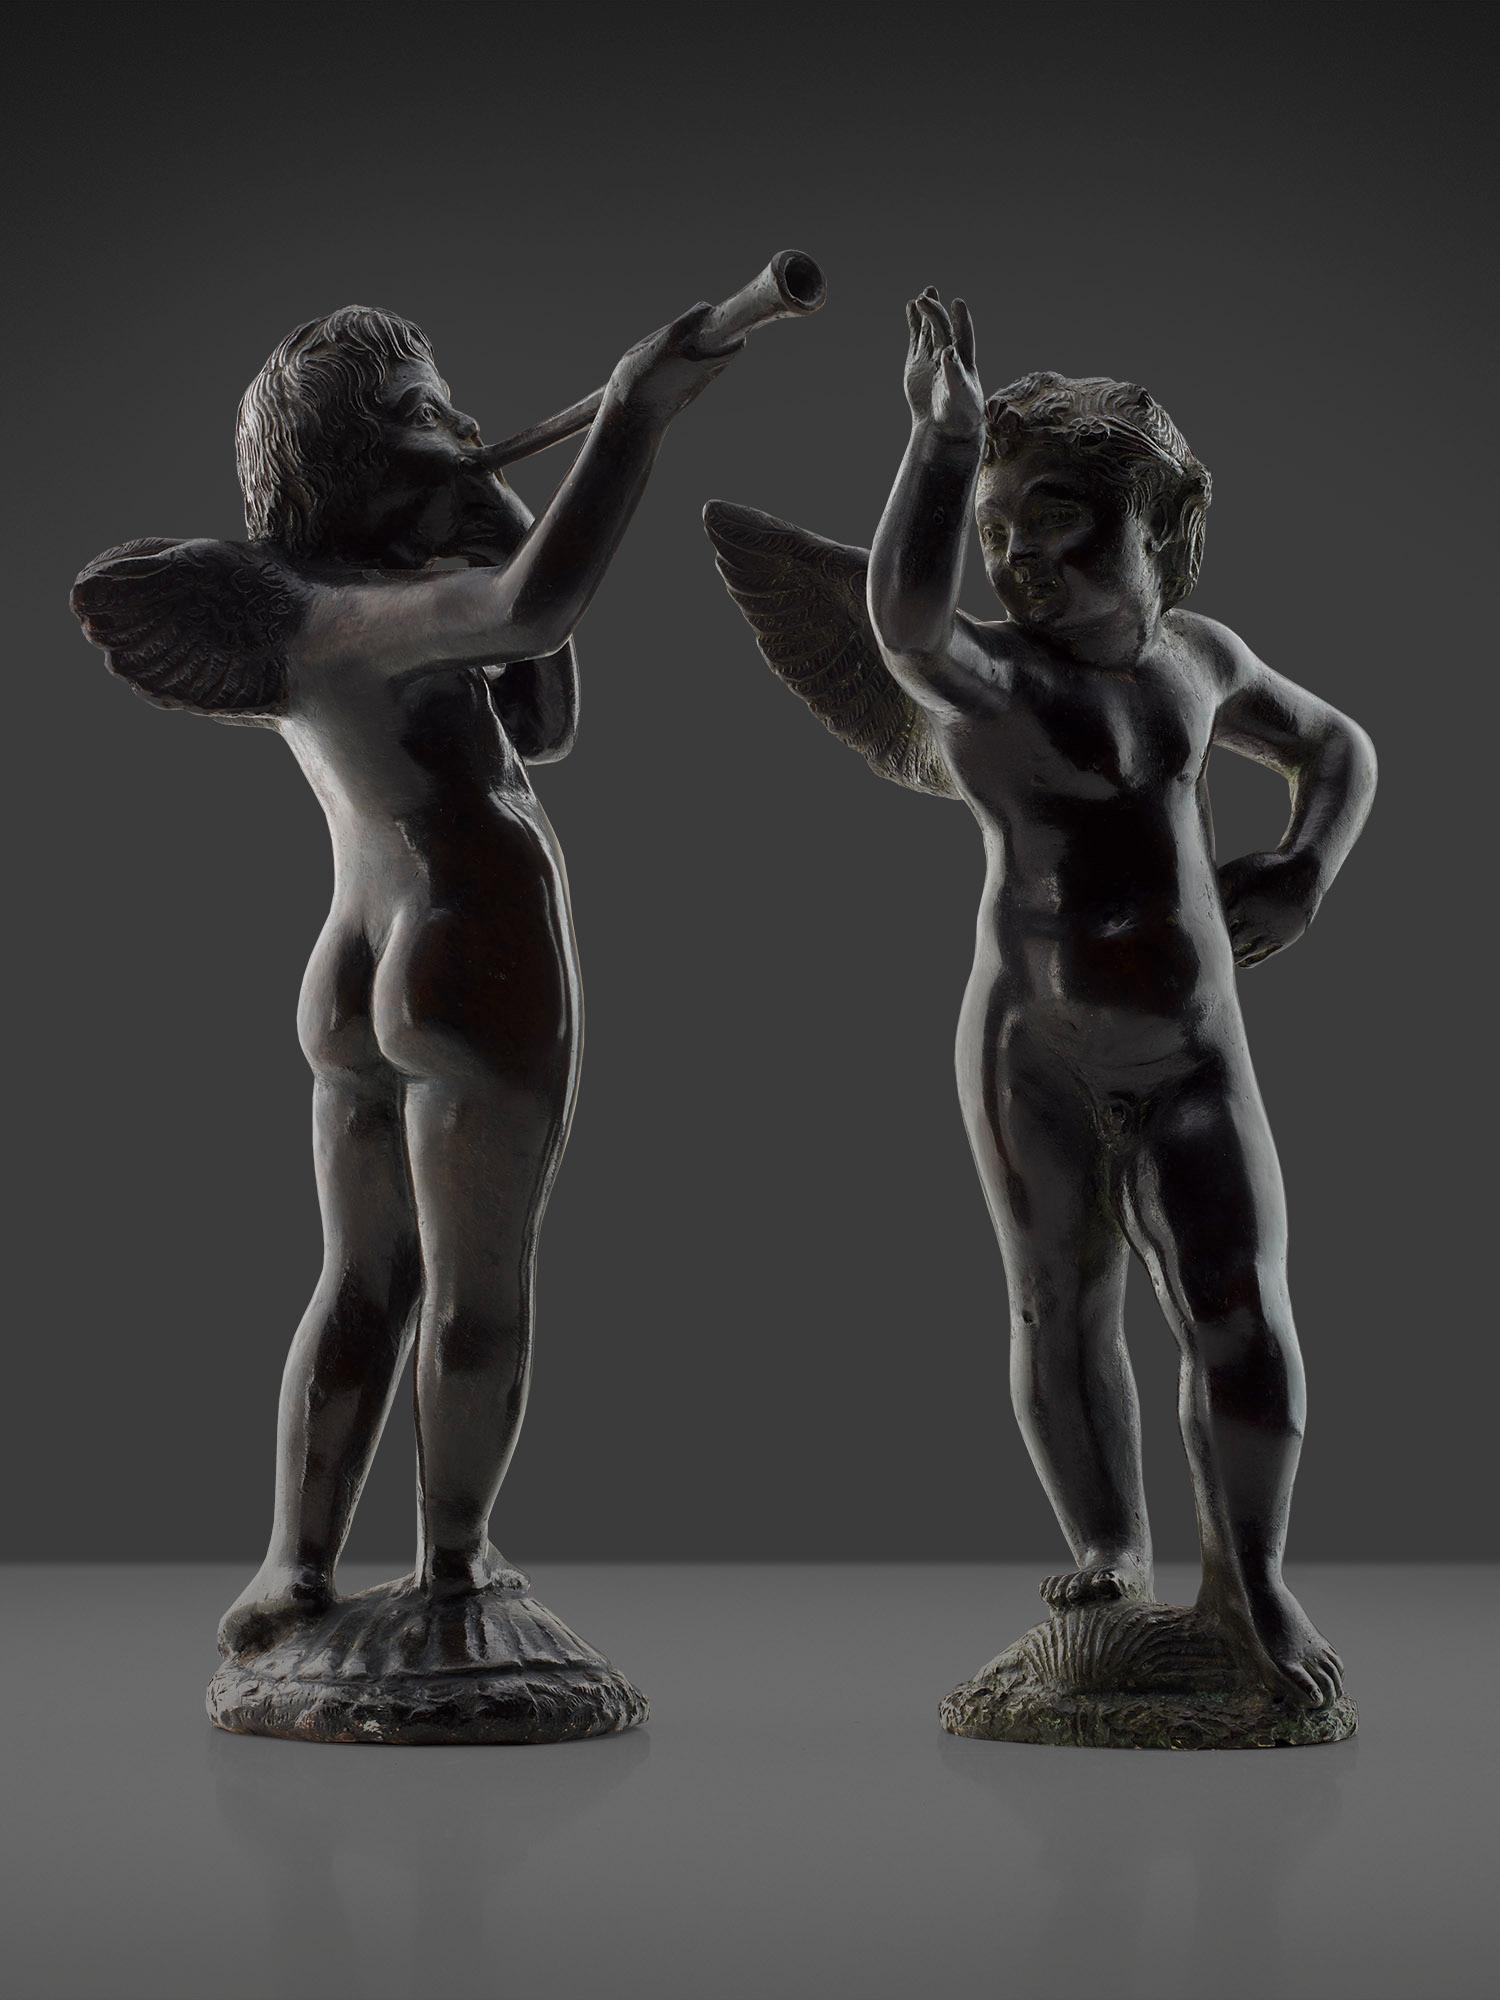 Bonze with a beautiful dark brown patina. The two enchanting statuettes are characteristic of the figural style of Niccolò Roccatagliata (1593).
sculptor Niccolò Roccatagliata (1593-1636), who was mainly active in Venice. Apart from larger